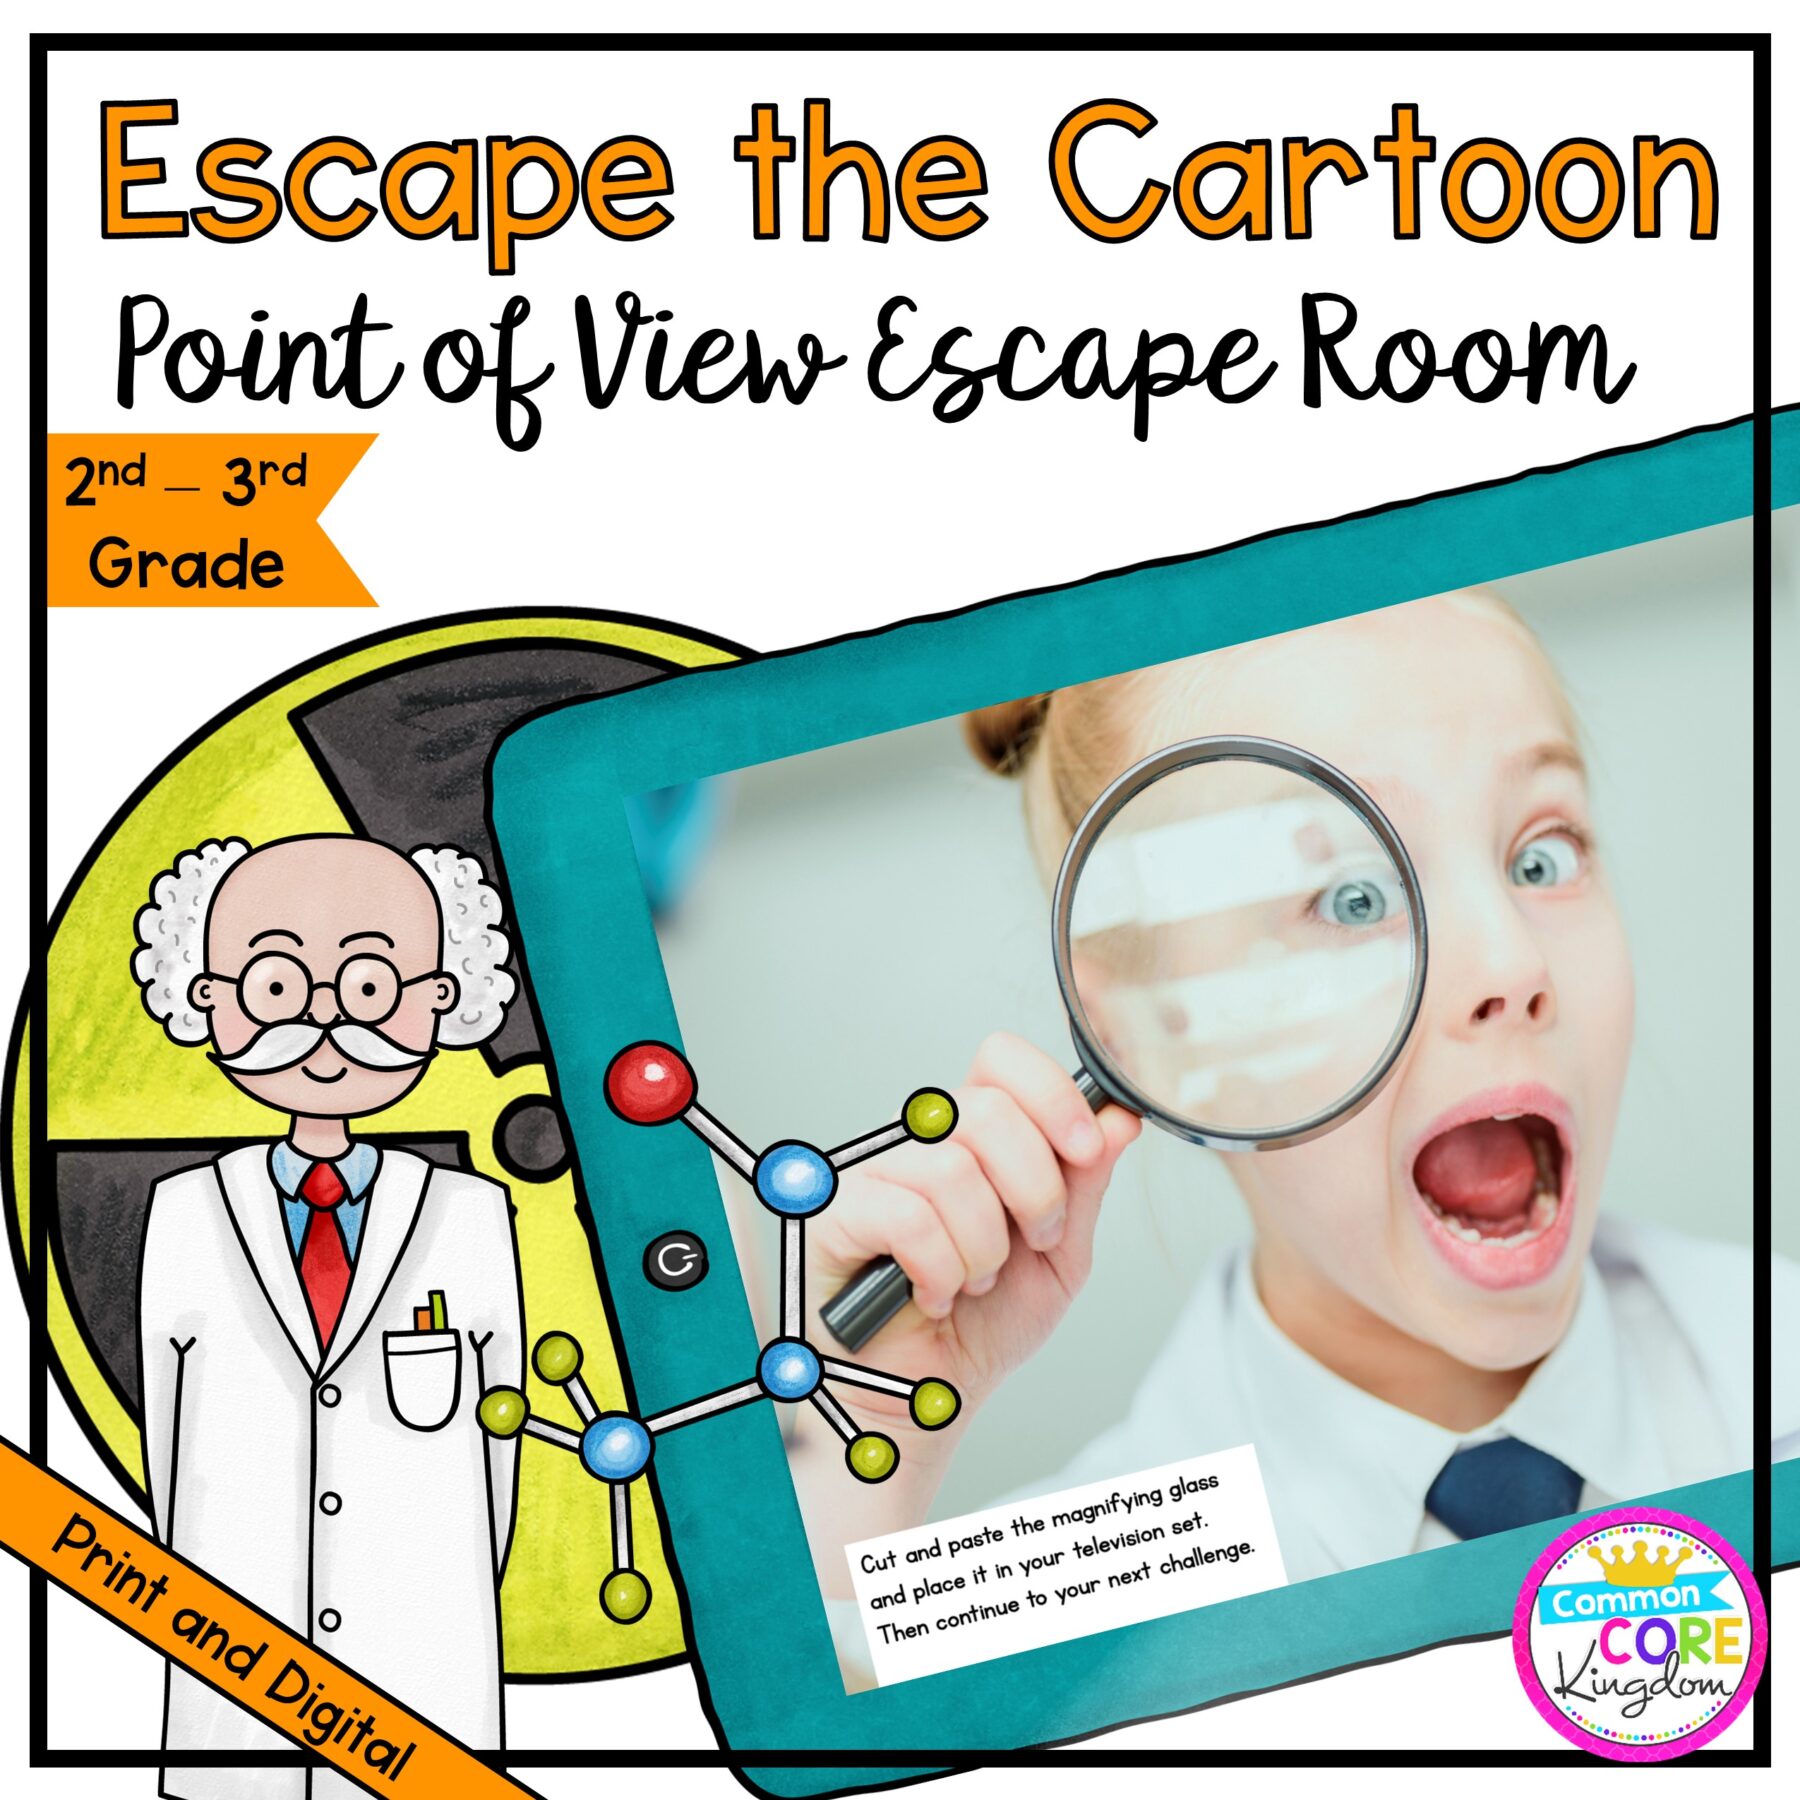 Escape the Cartoon Point of View Escape Room for 2nd & 3rd Grade in Digital & Printable Format